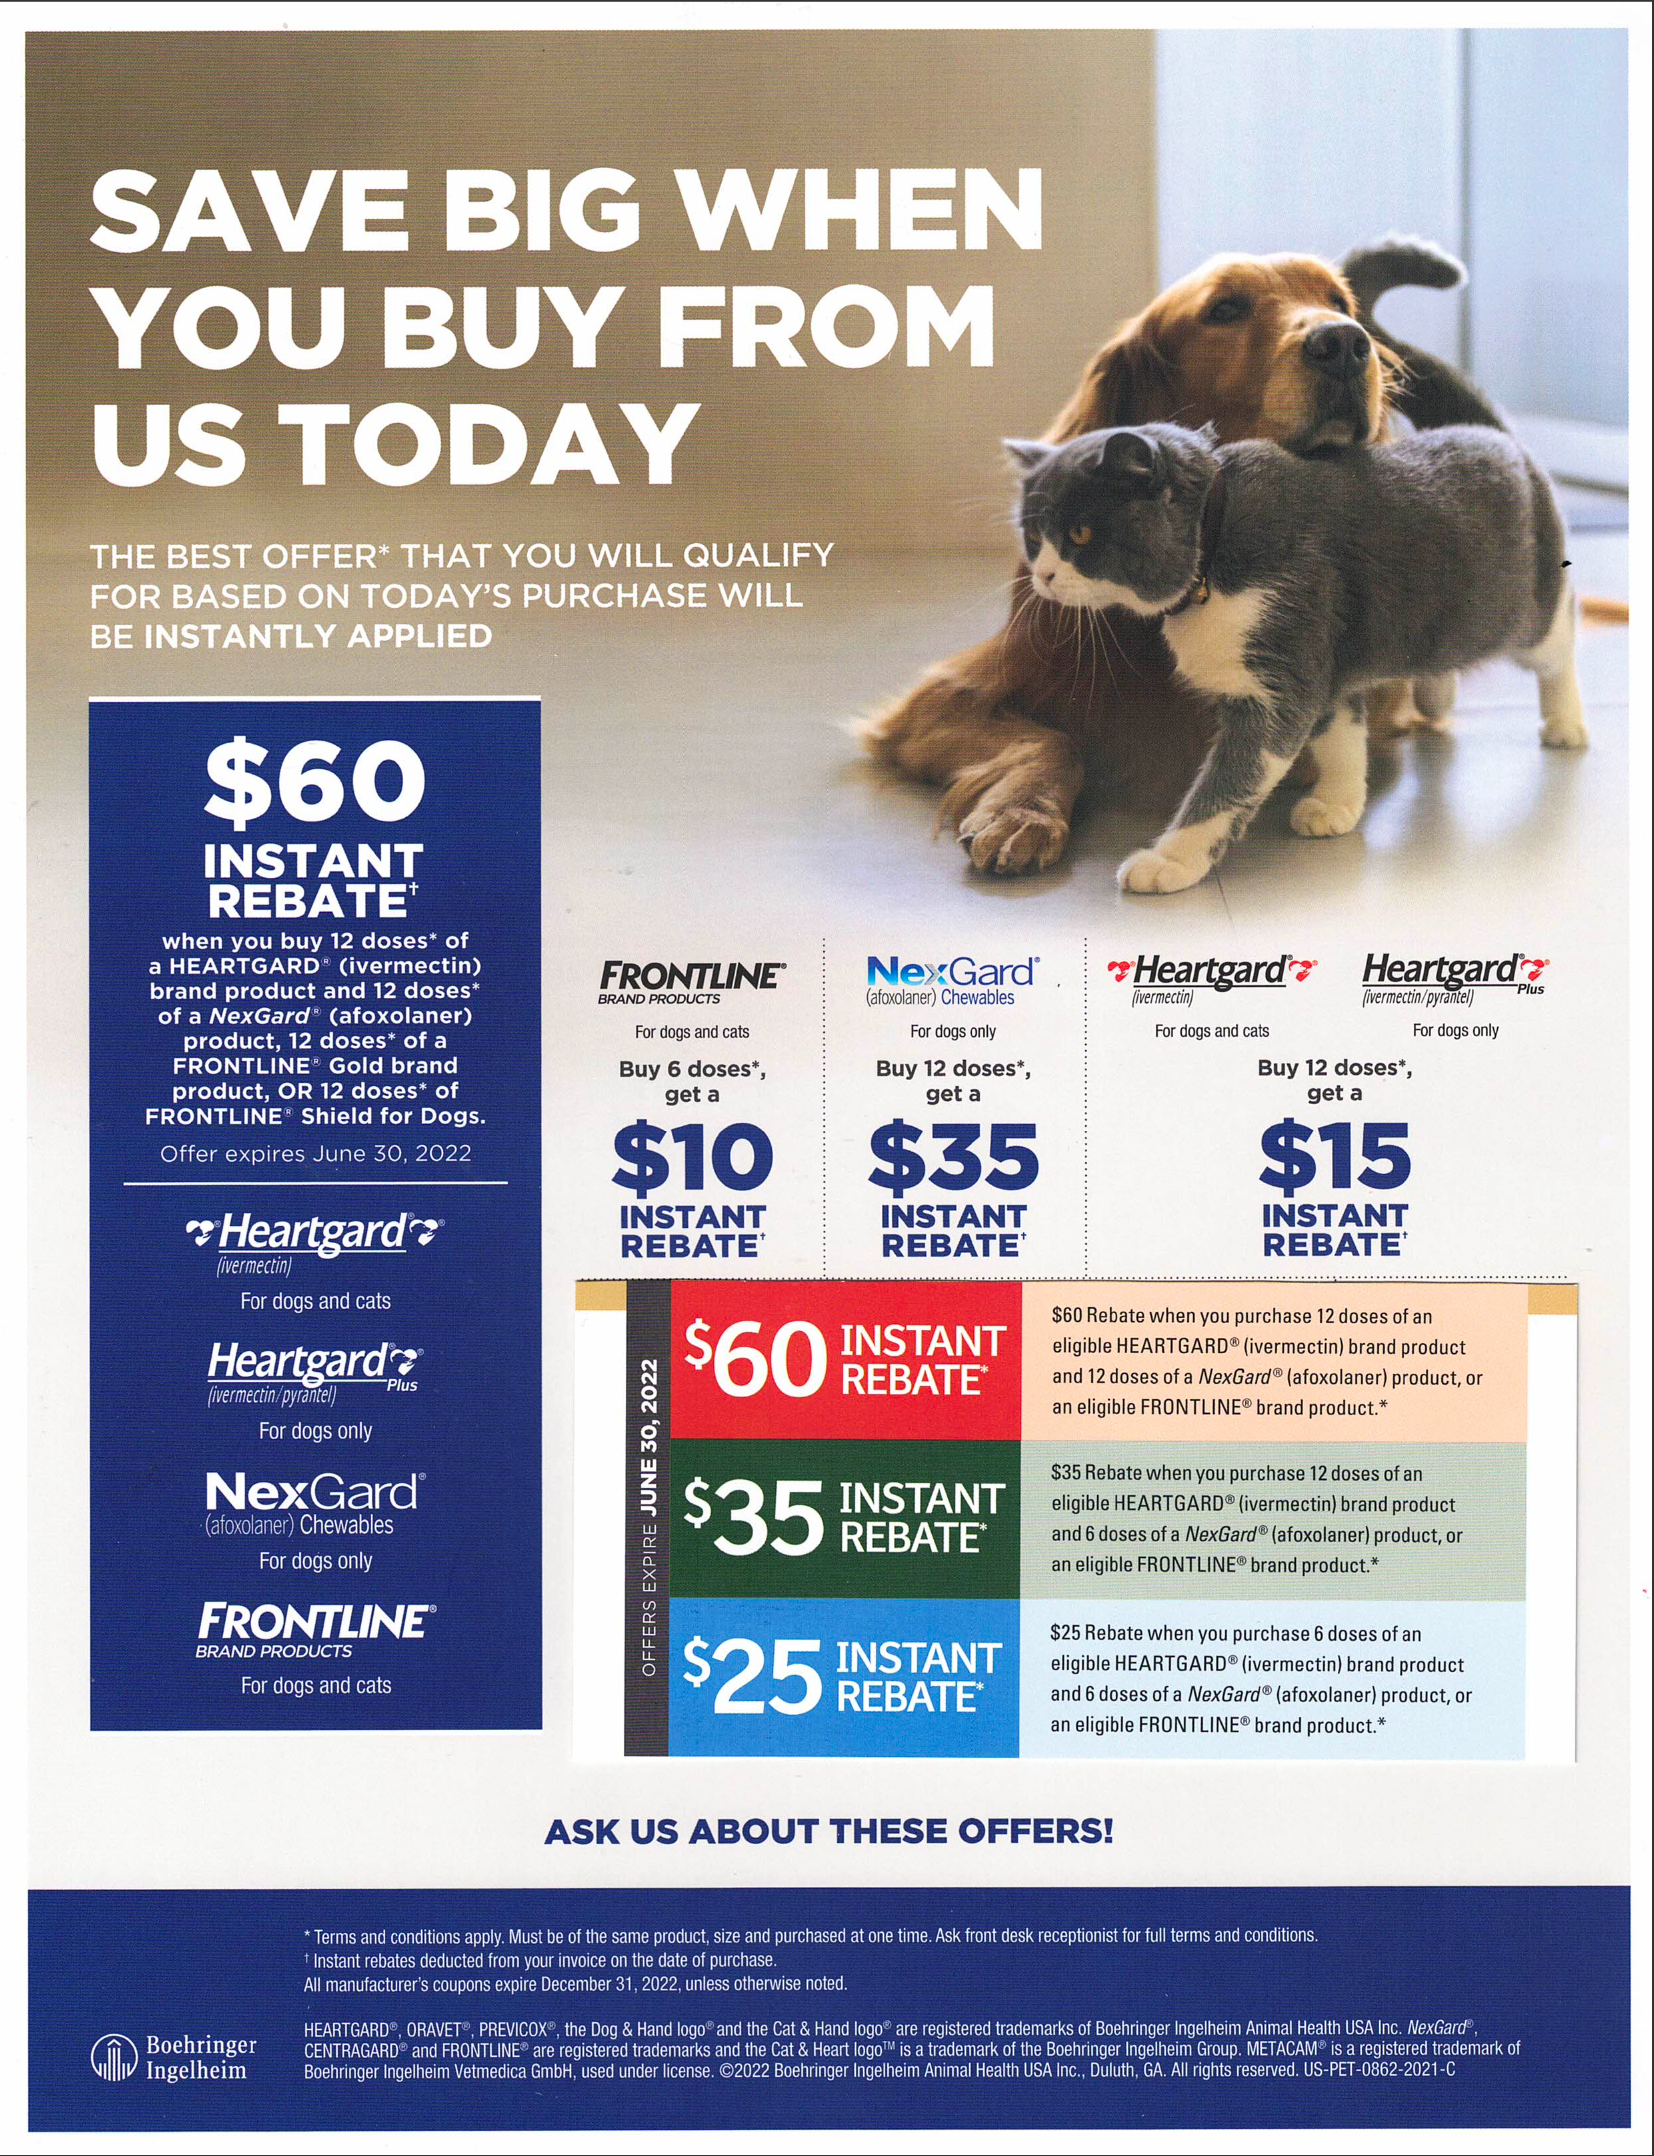 how much does heartgard cost for dogs